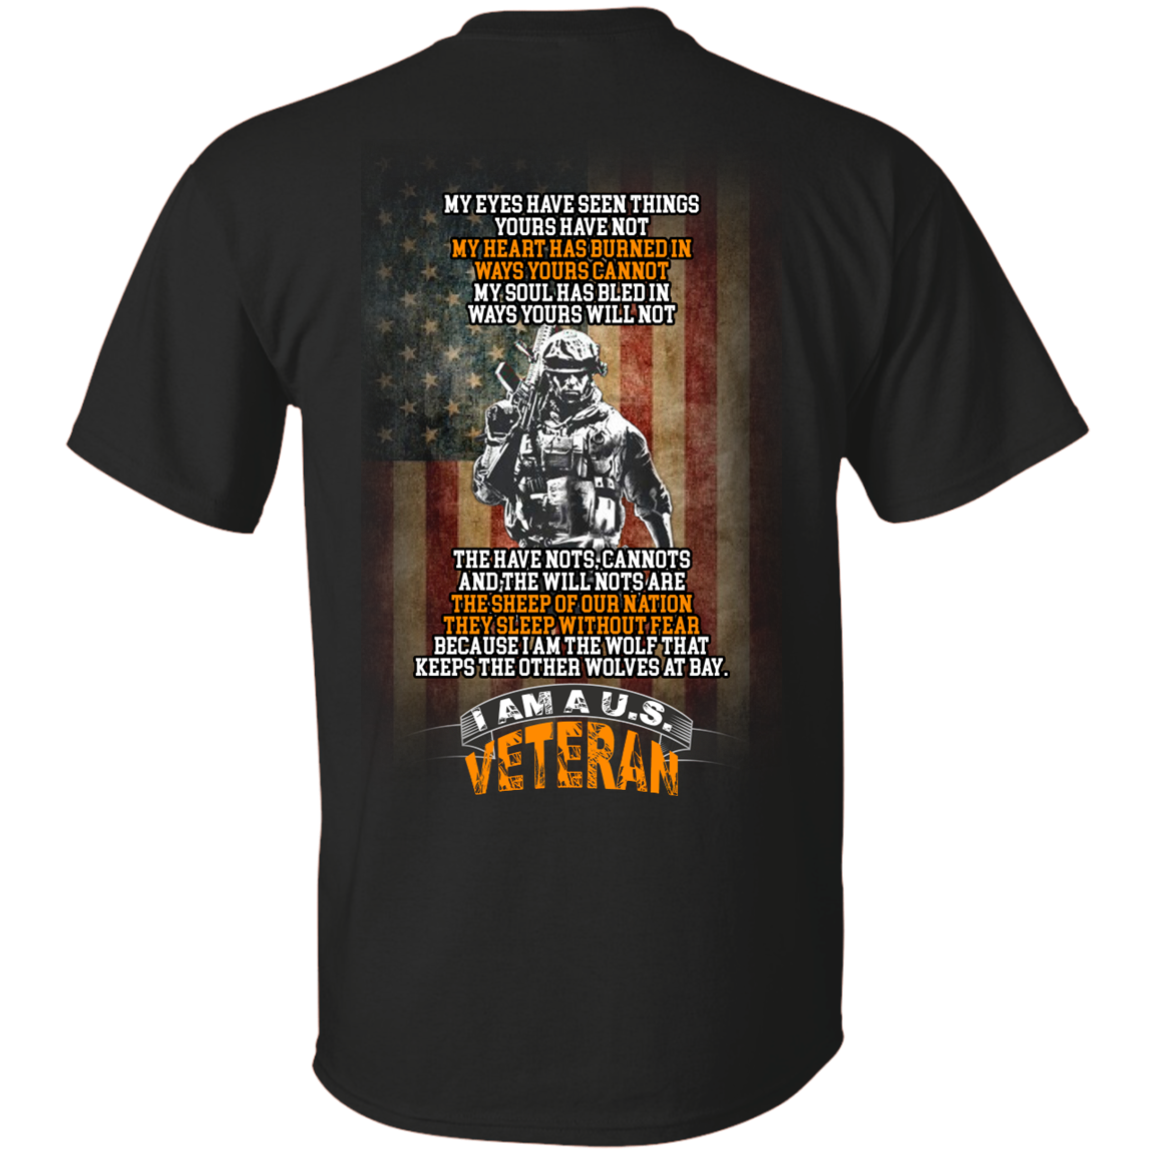 Veteran: My eyes have seen things yours have not shirt, tank